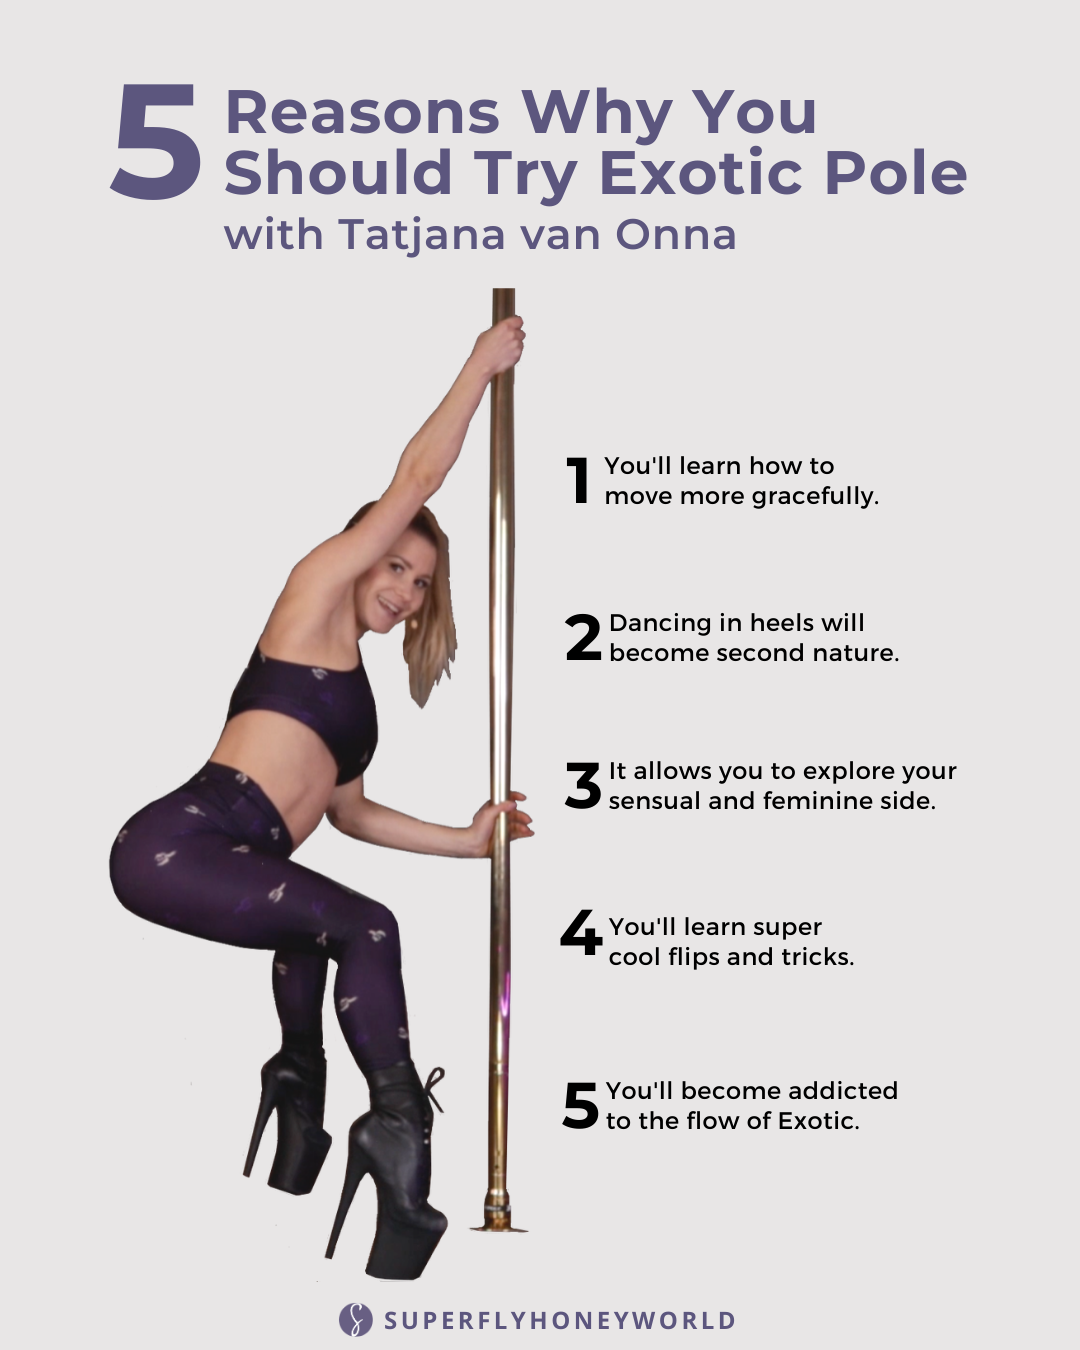 Pole dancer holding a pole with 5 reasons why you should try exotic pole